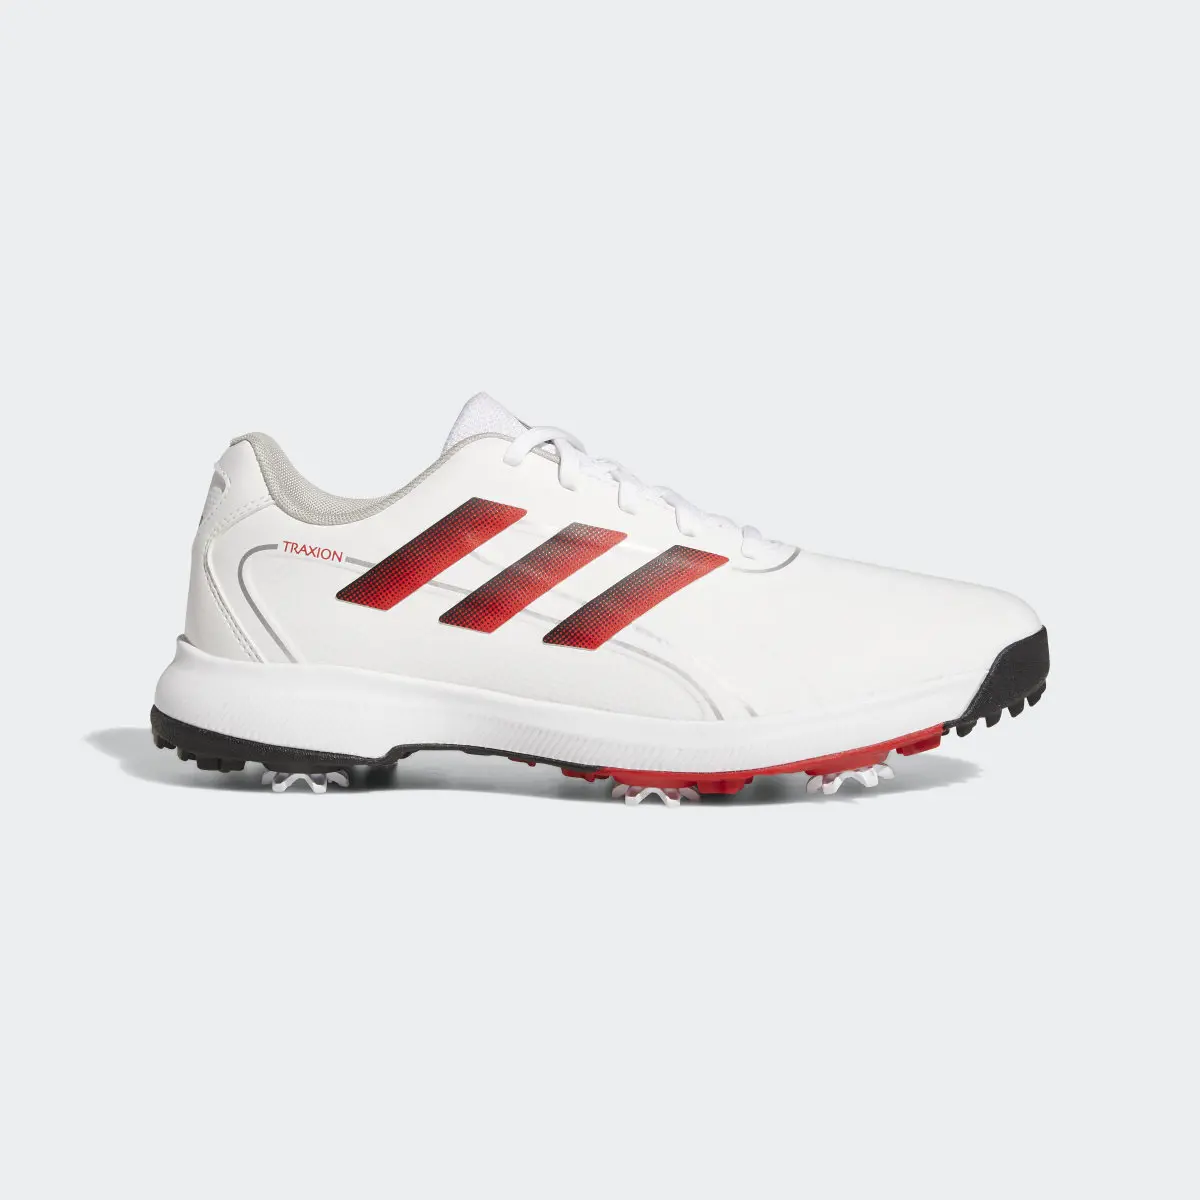 Adidas Traxion Lite Max Wide Golf Shoes. 2